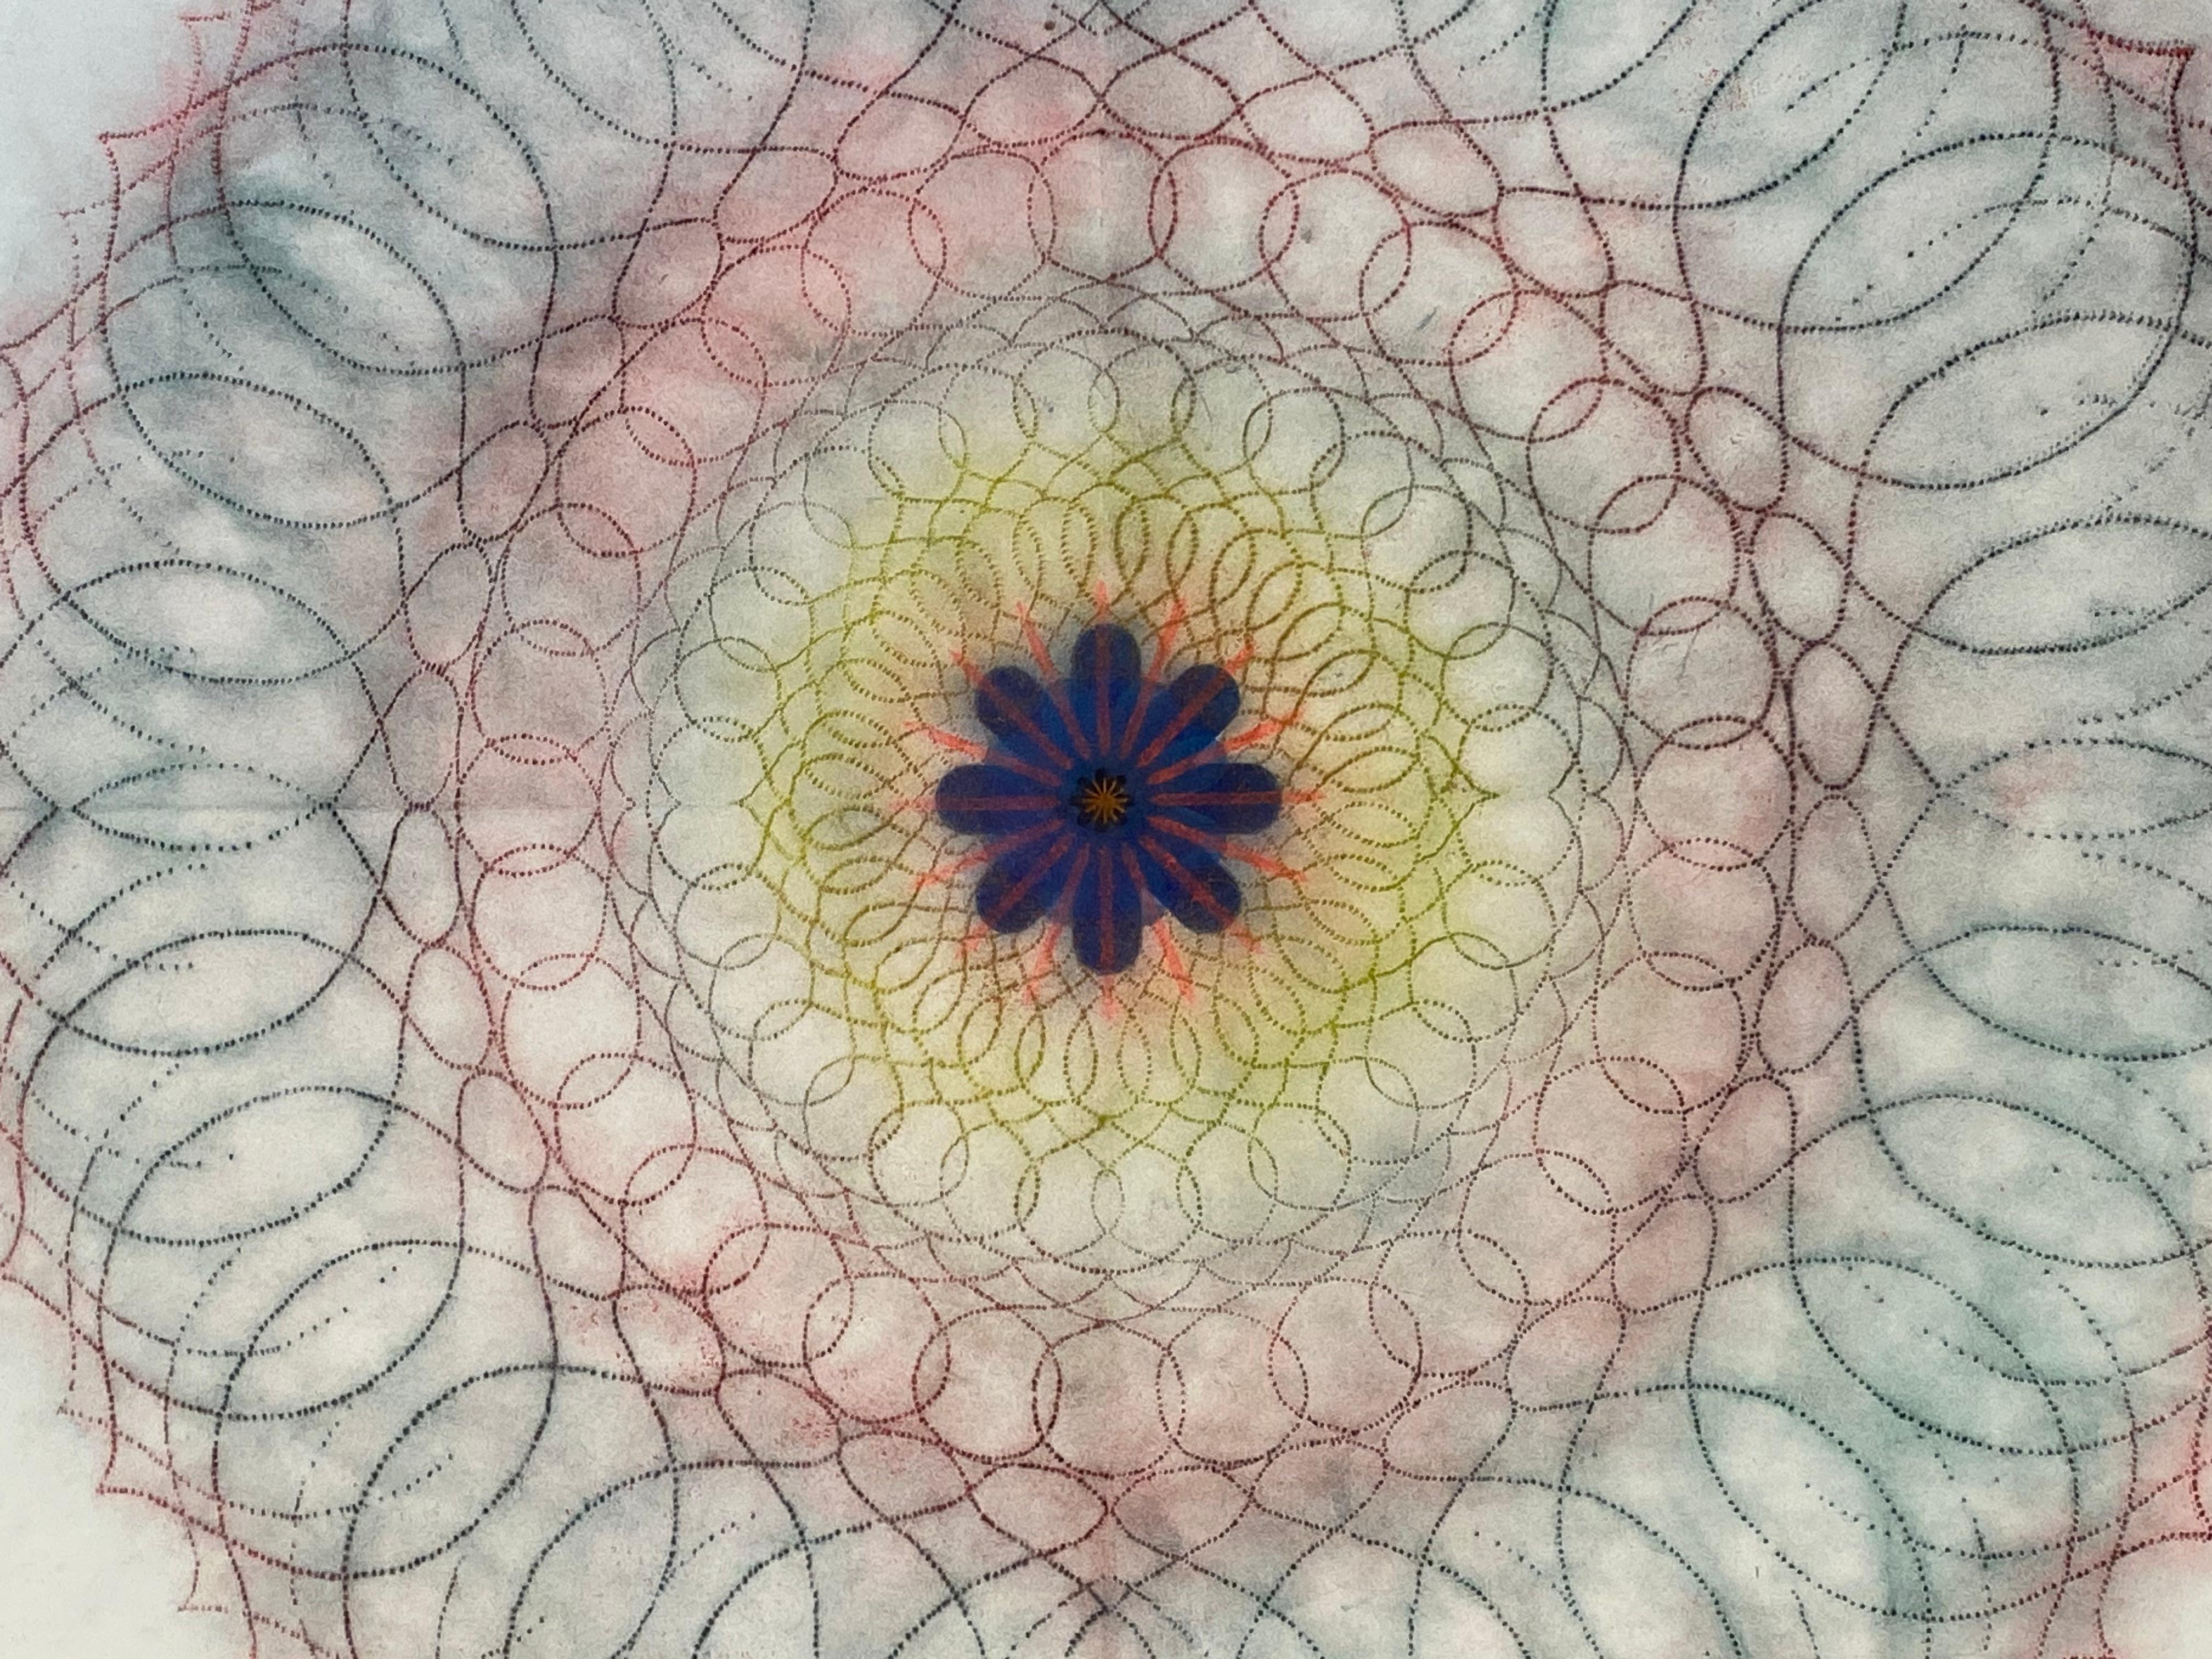 This multicolored drawing has a beautiful, soft mottled texture created with Judge's unique powered pigment technique. Primavera Pop 29 is a predominately dark red and dark navy mandala shape with green, blue, dark red and bright yellow and orange